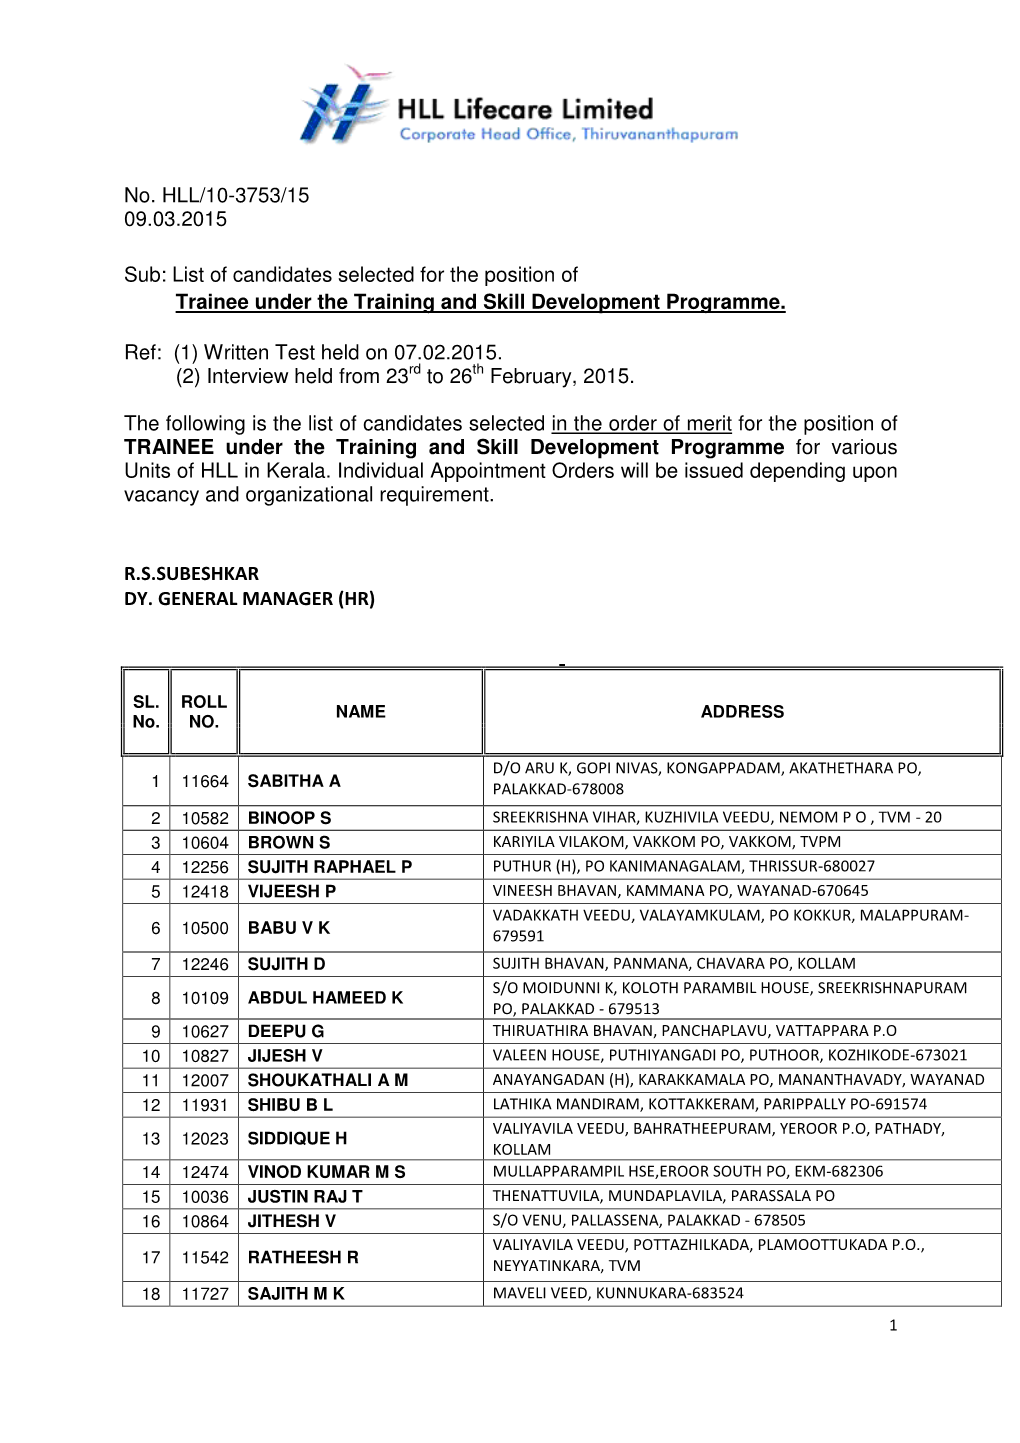 No. HLL/10-3753/15 09.03.2015 Sub: List of Candidates Selected for The